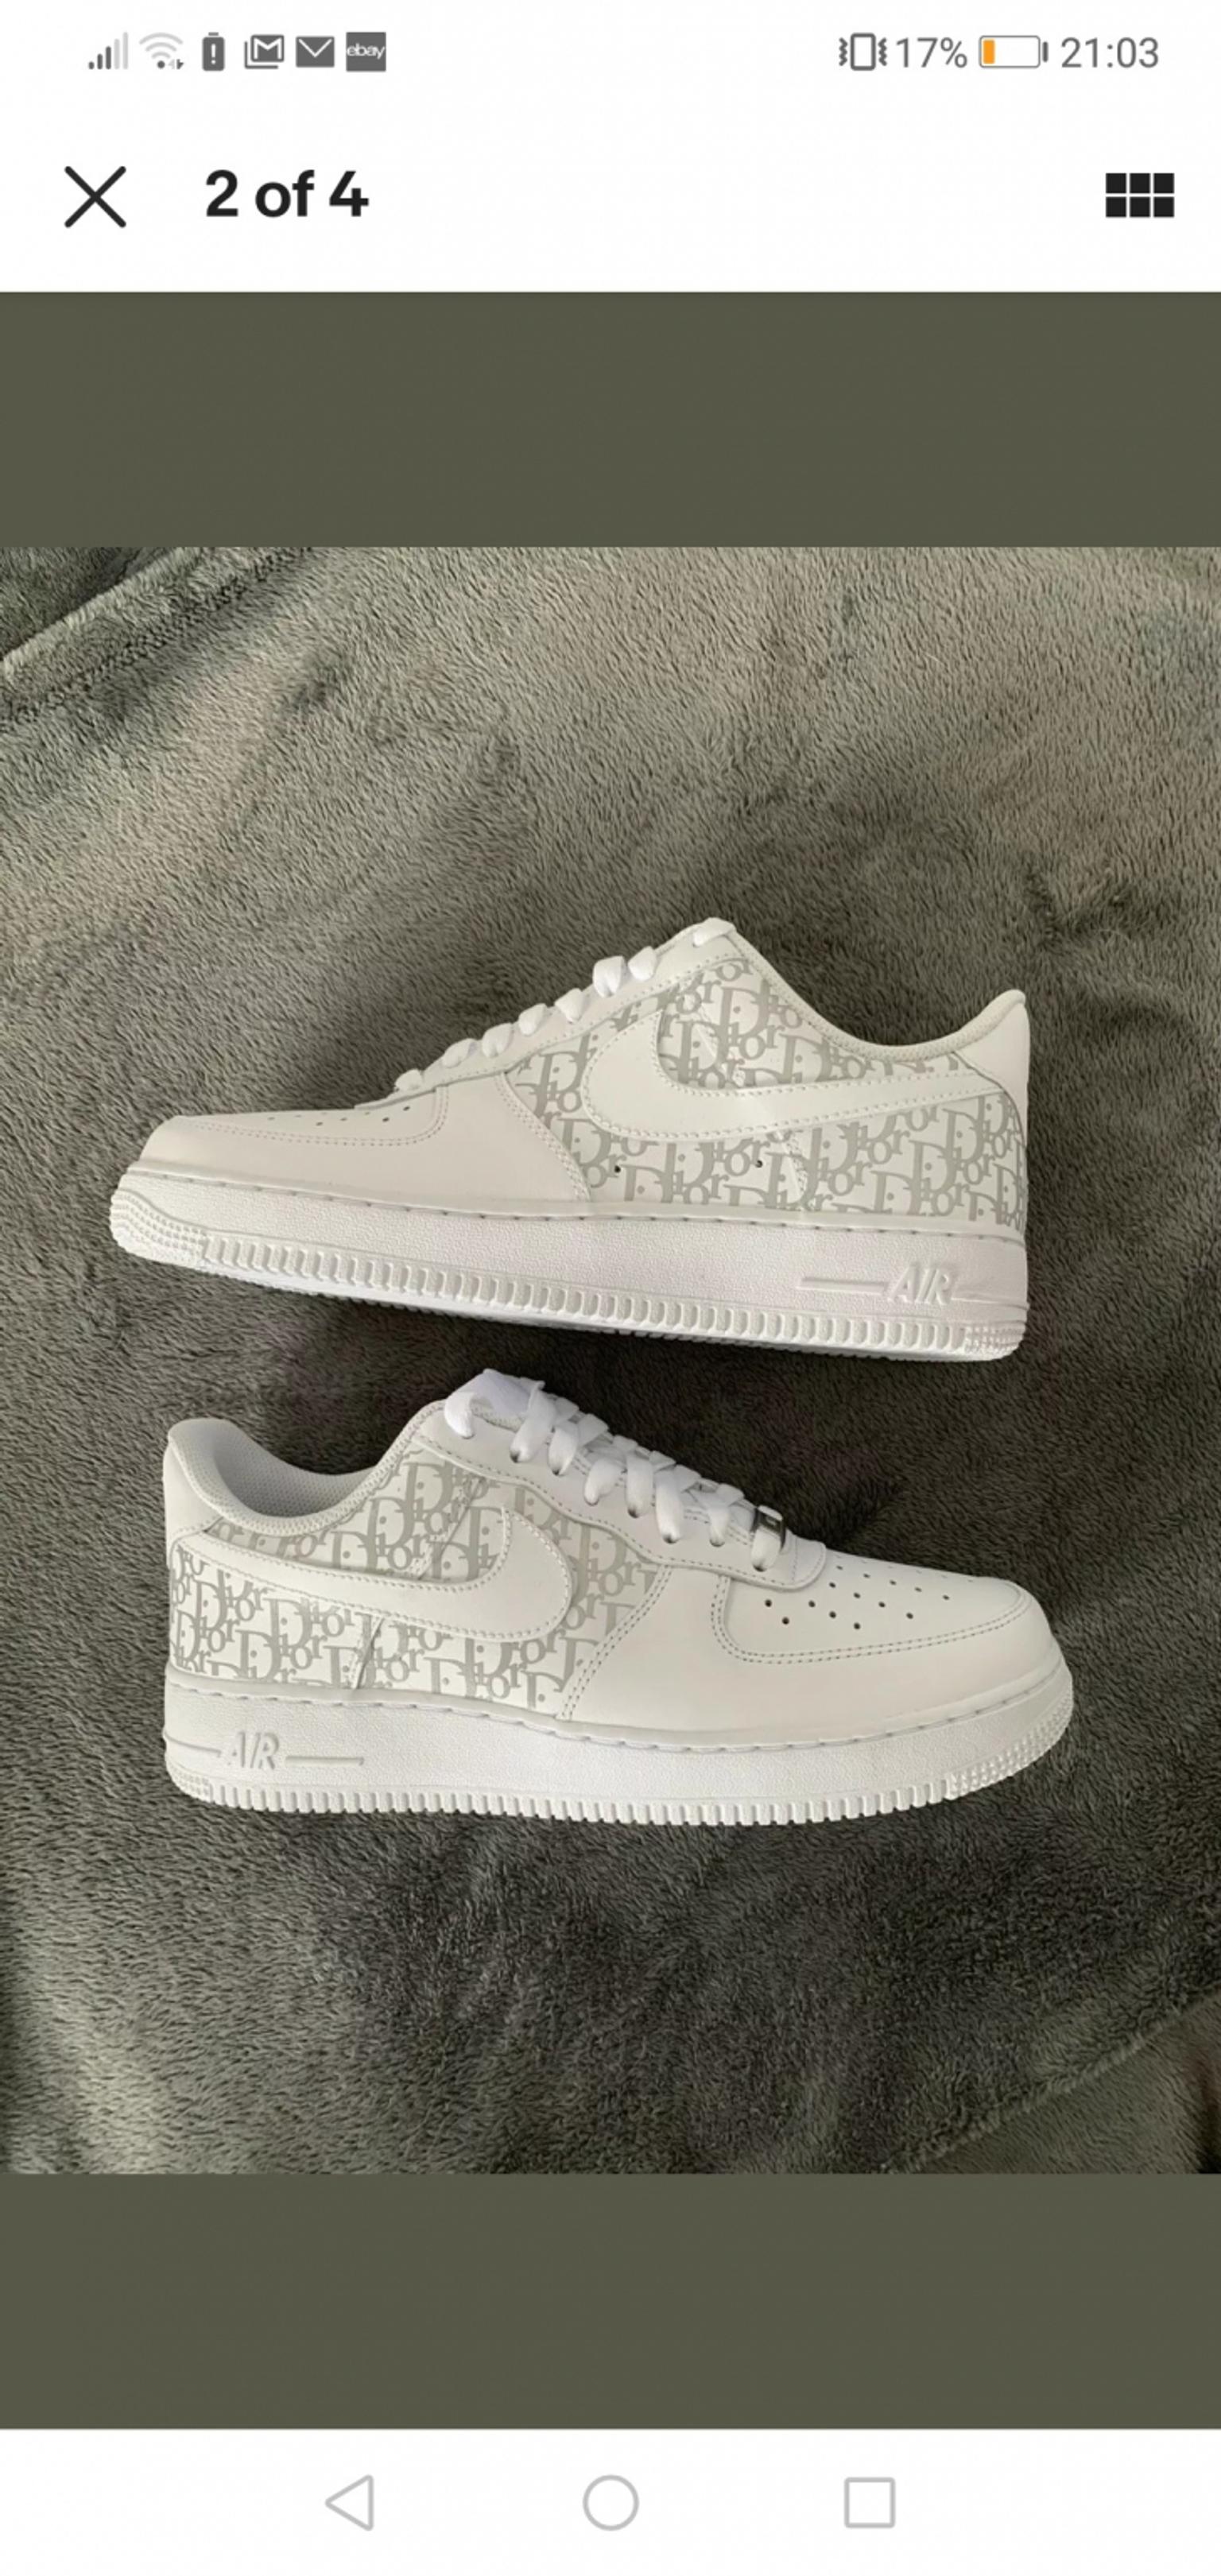 size 7.5 white air force 1